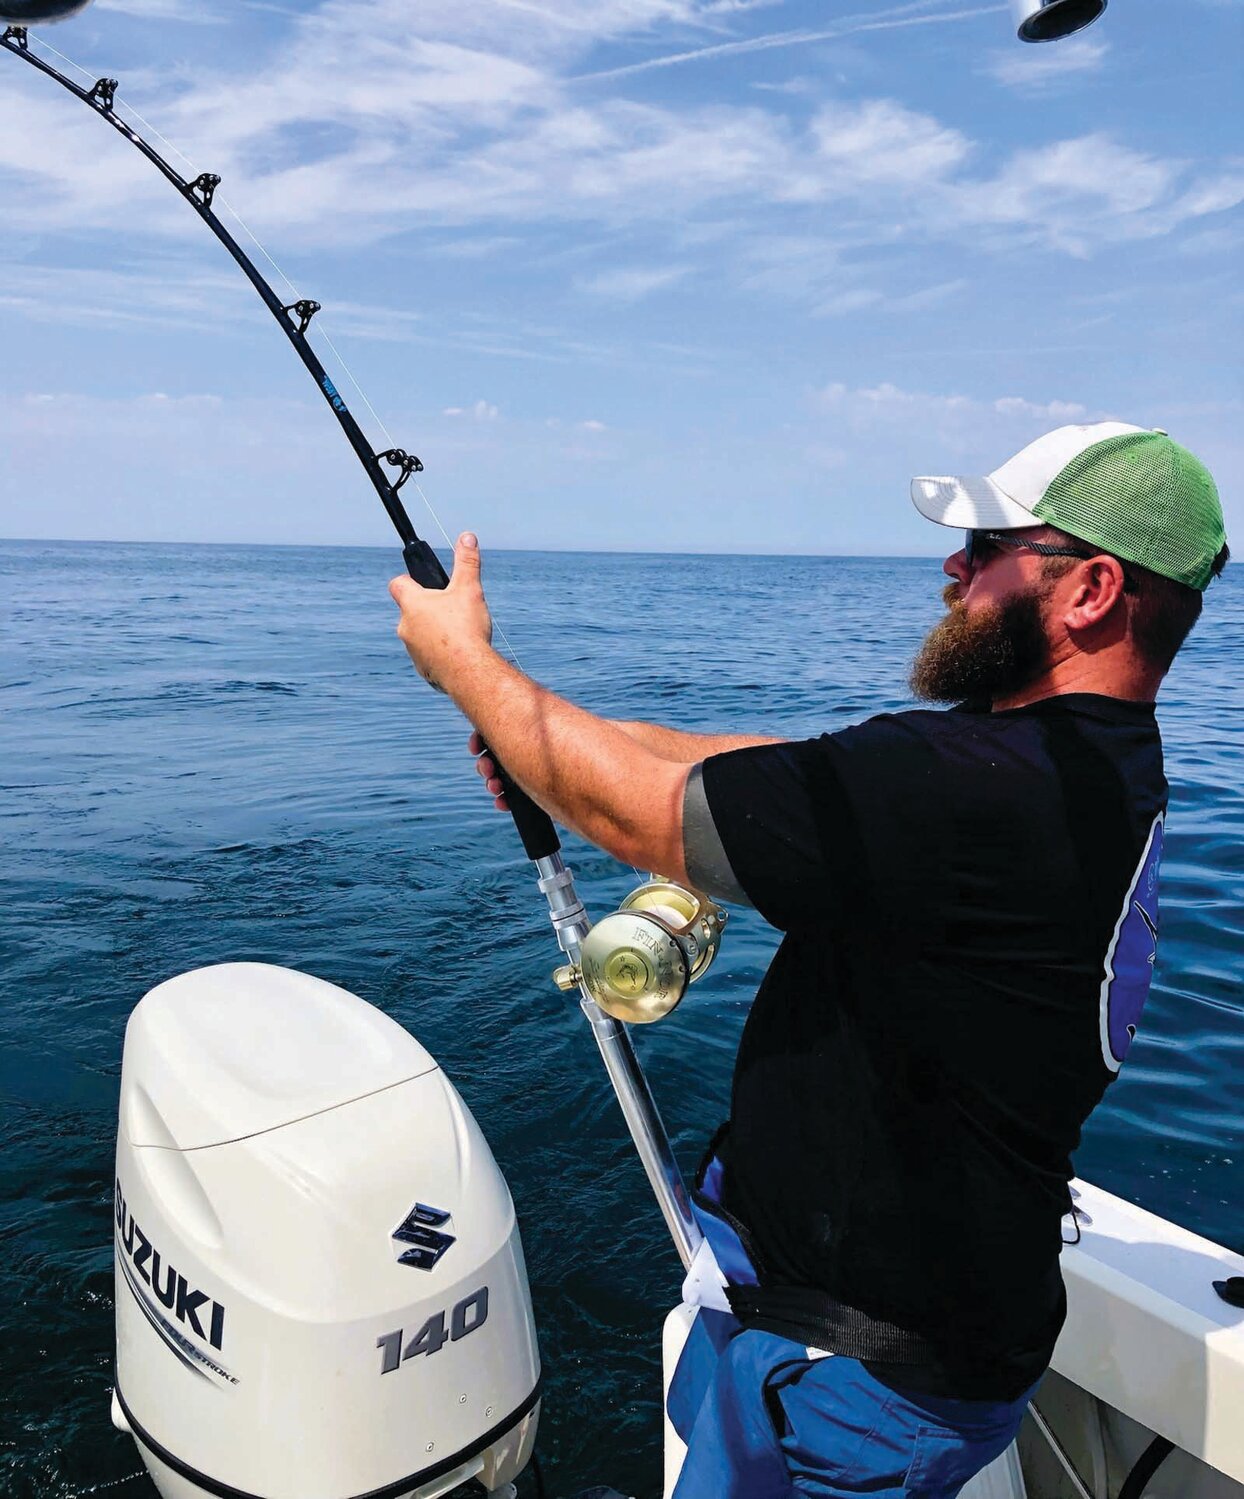 REELING IT IN: Shawn Hayes Costello reels in a thresher shark on his father’s (Greg Vespe) boat southeast of the Sakonnet River.  Vespe’s father and his cousin Stephano from Italy were also part of the crew.